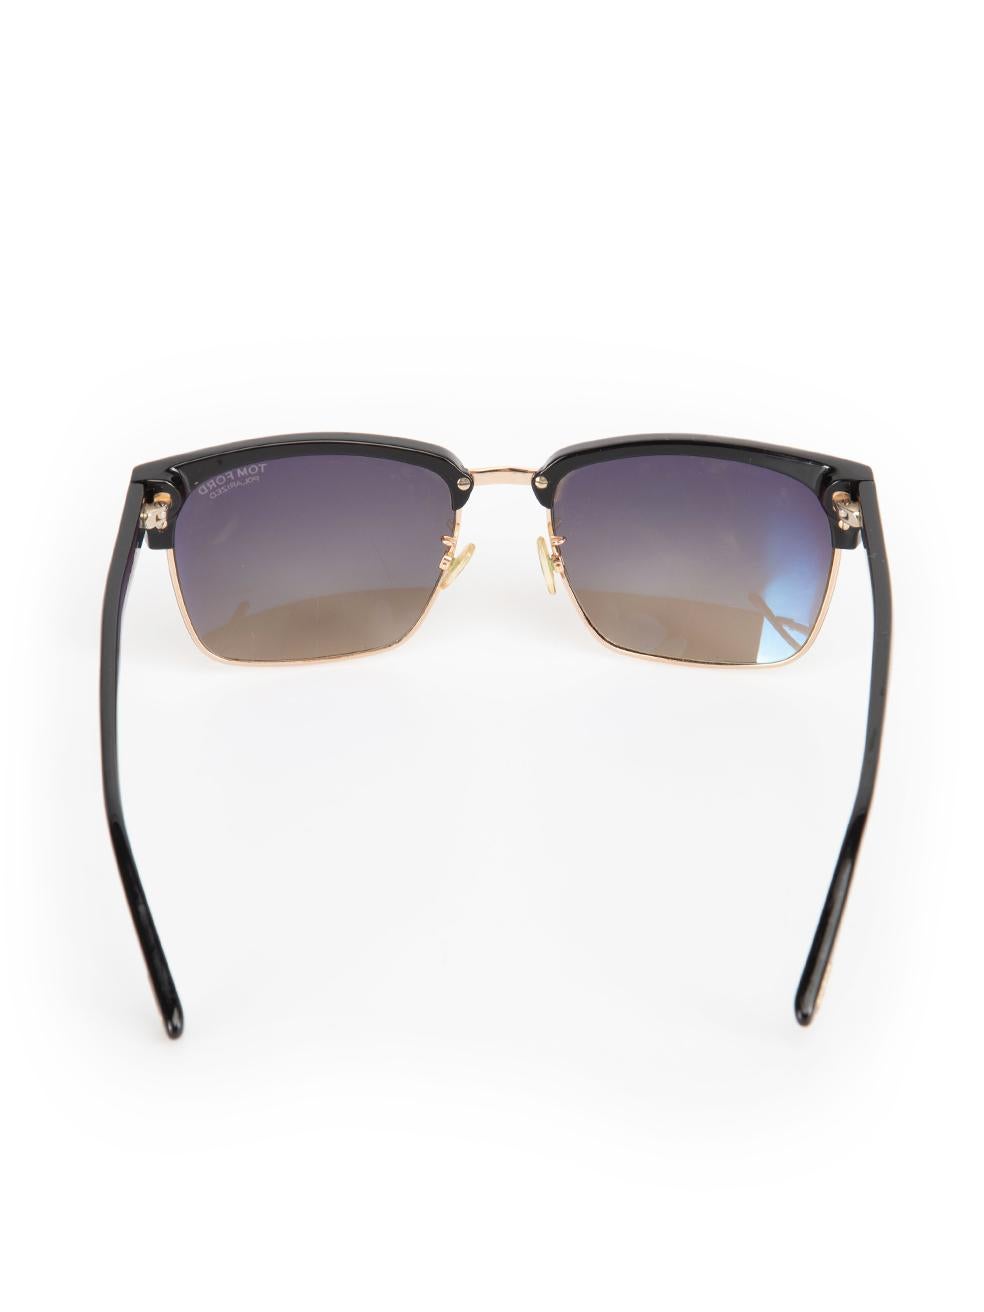 Tom Ford Black Gradient Square Frame Sunglasses In Good Condition For Sale In London, GB